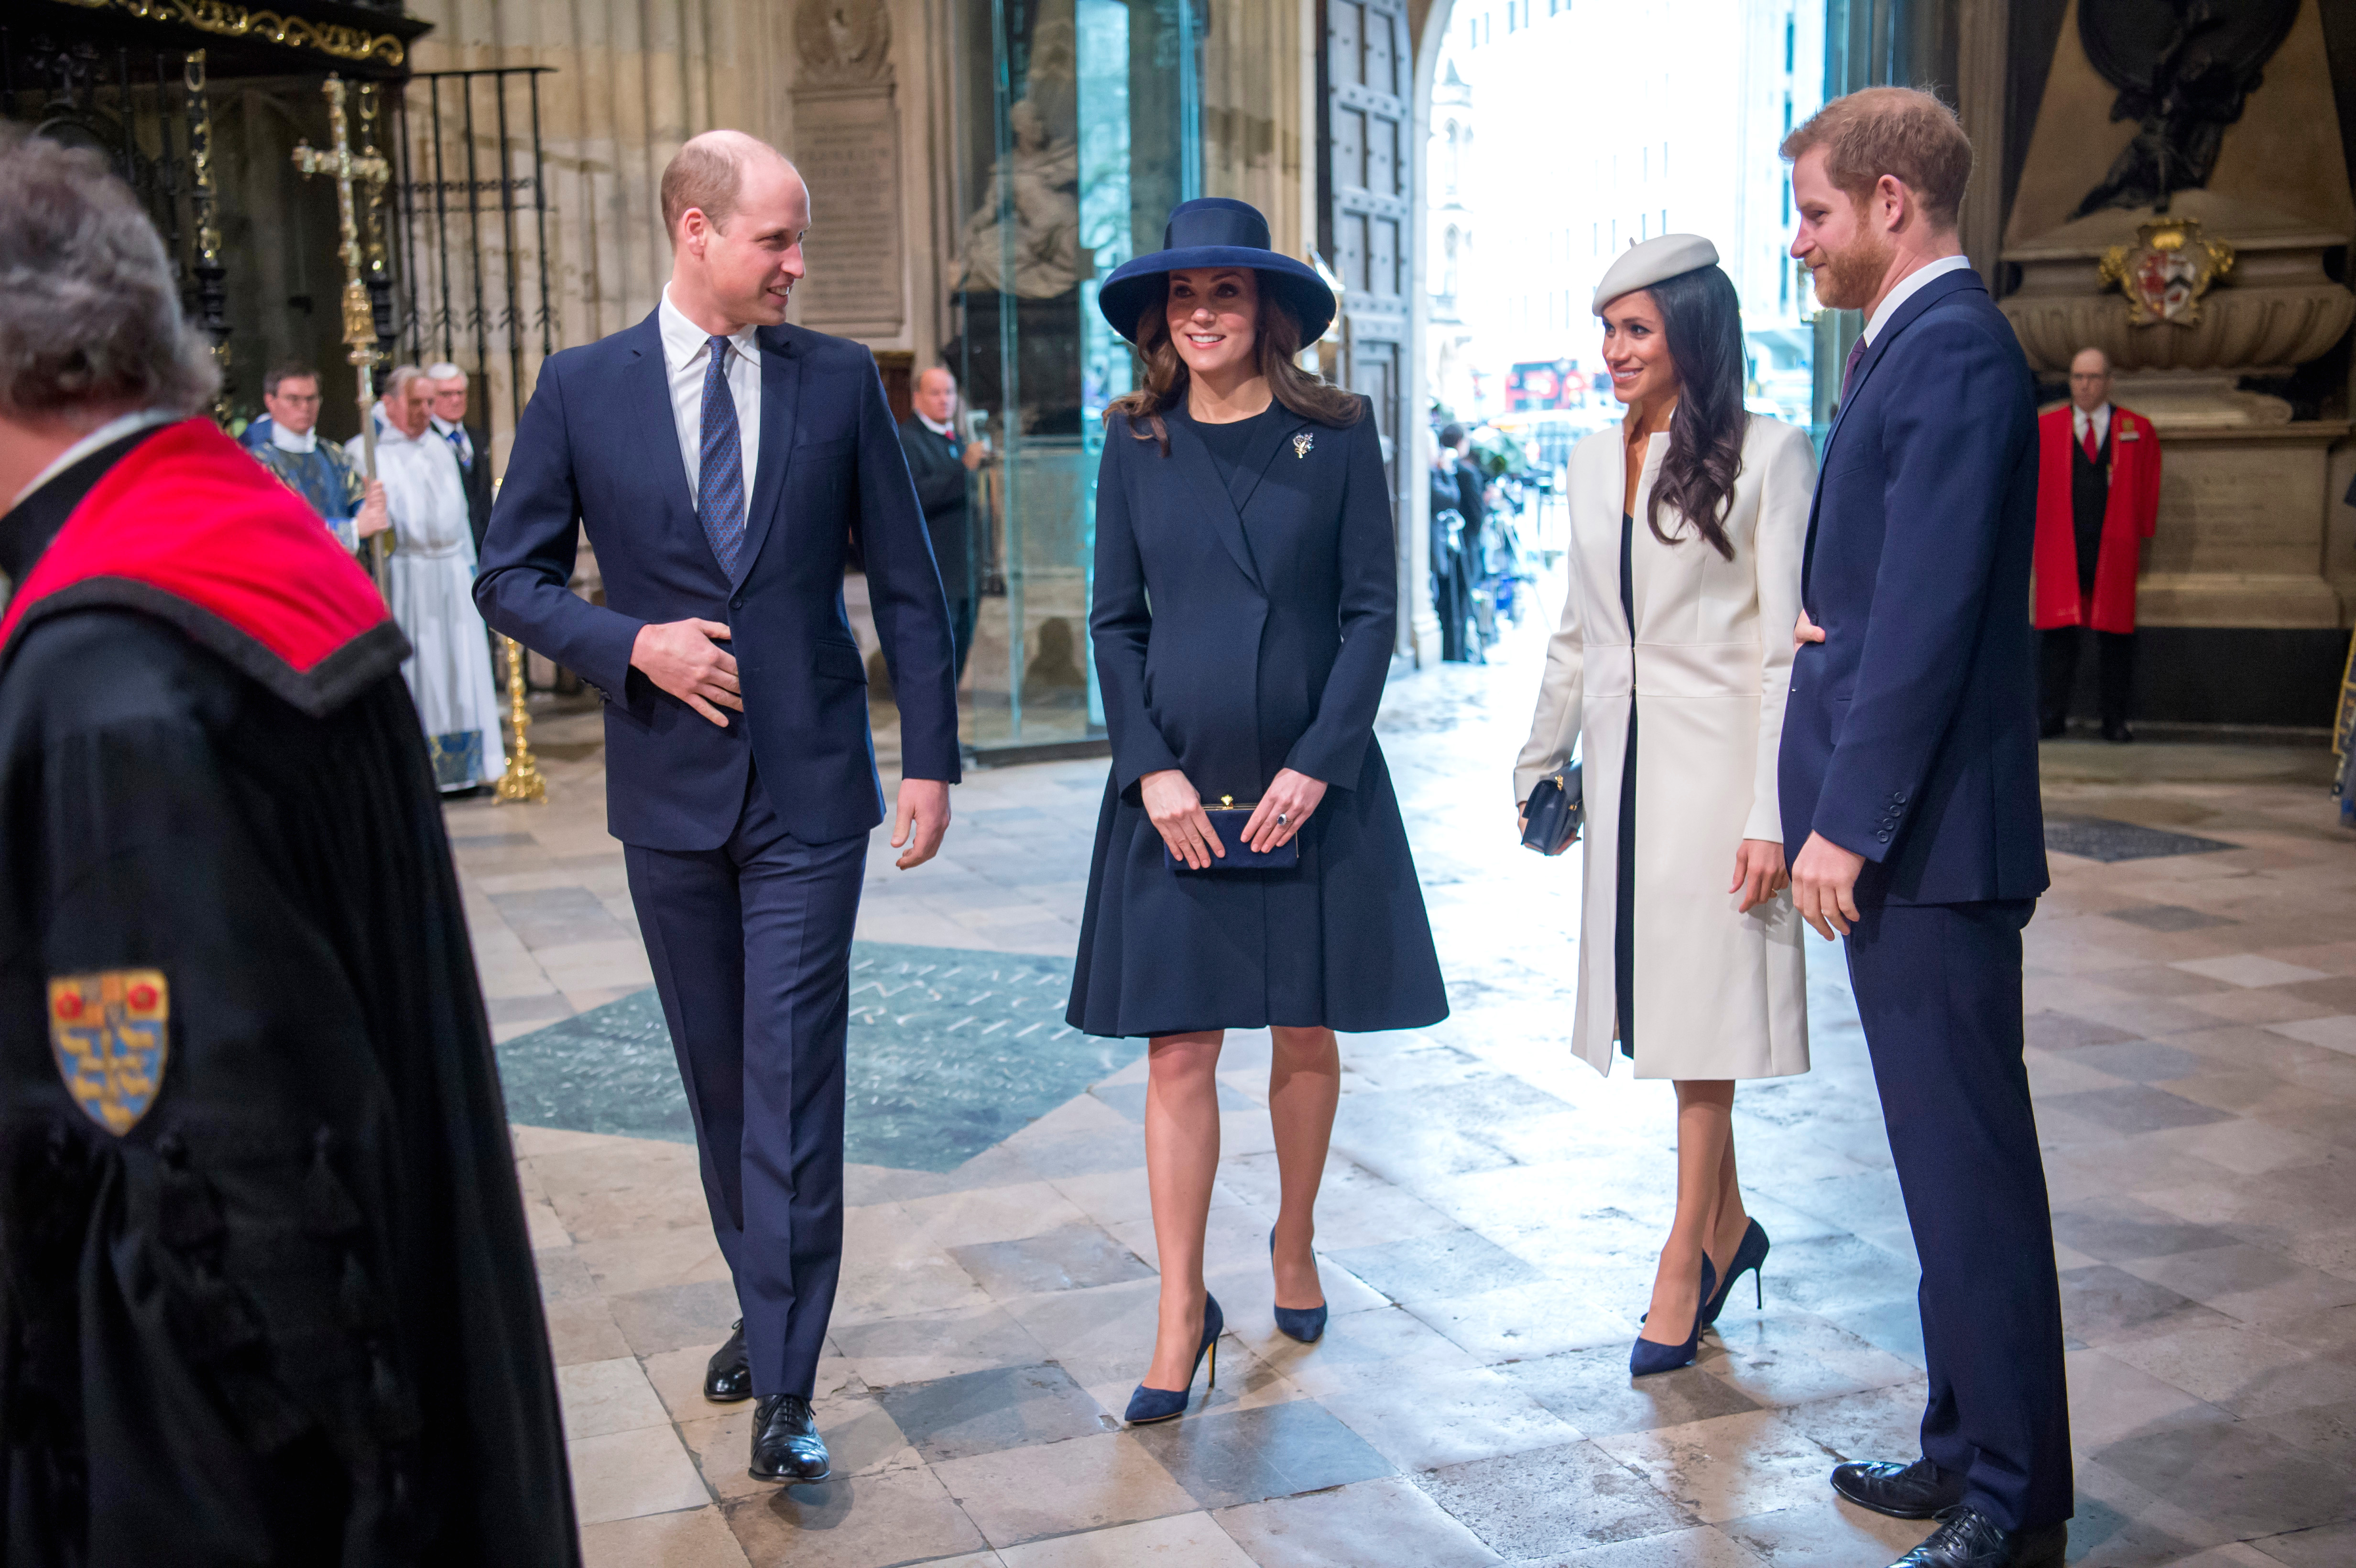 Prince Harry, Royal Family Drama Explained: What Happened | In Touch Weekly